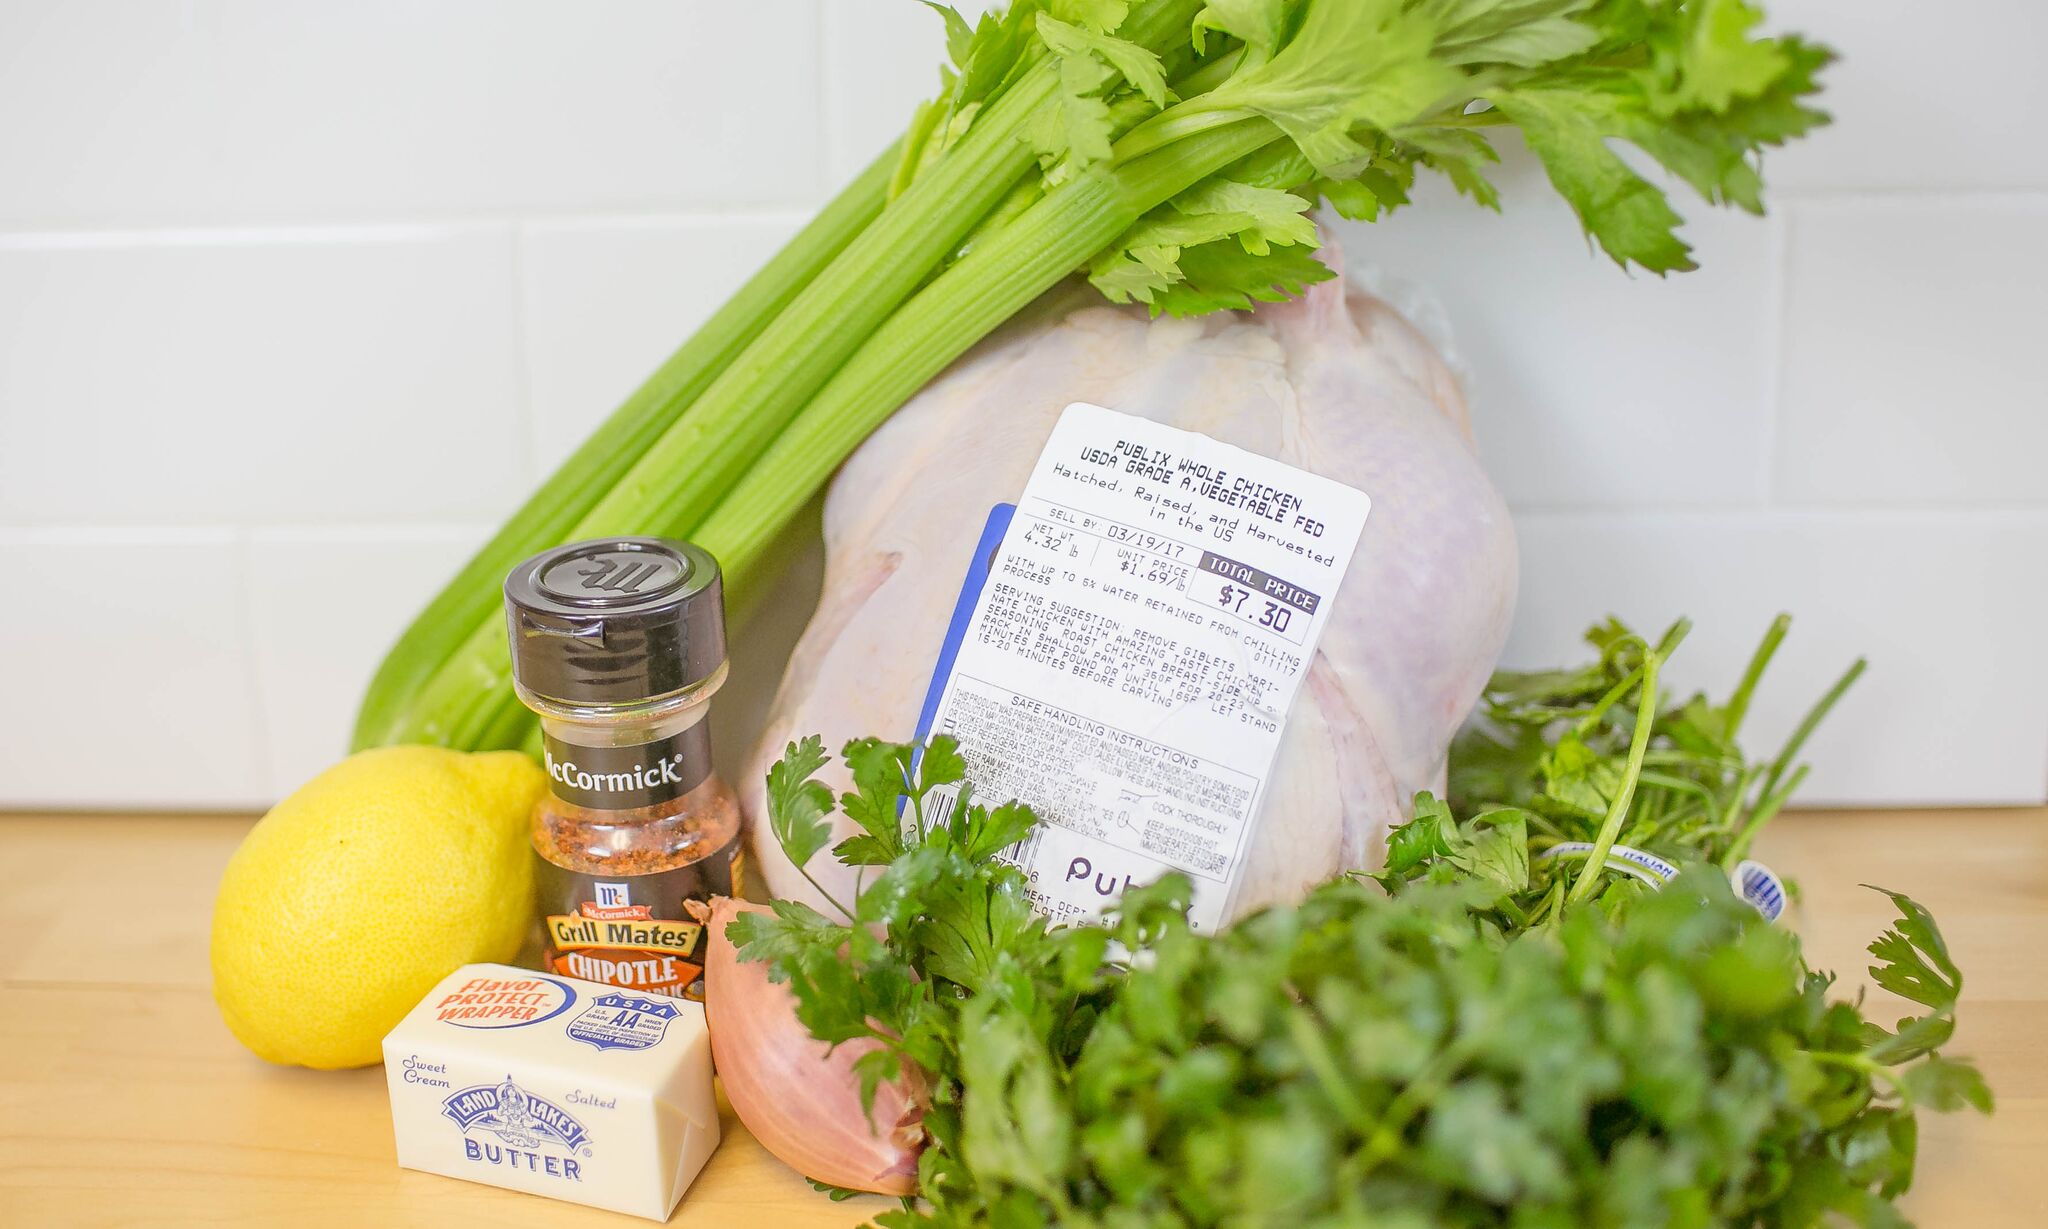 Gather your ingredients: Parsley, shallot, lemon, butter, whole chicken, Grill Mates Chipotle & Roasted Garlic seasoning, and celery. 